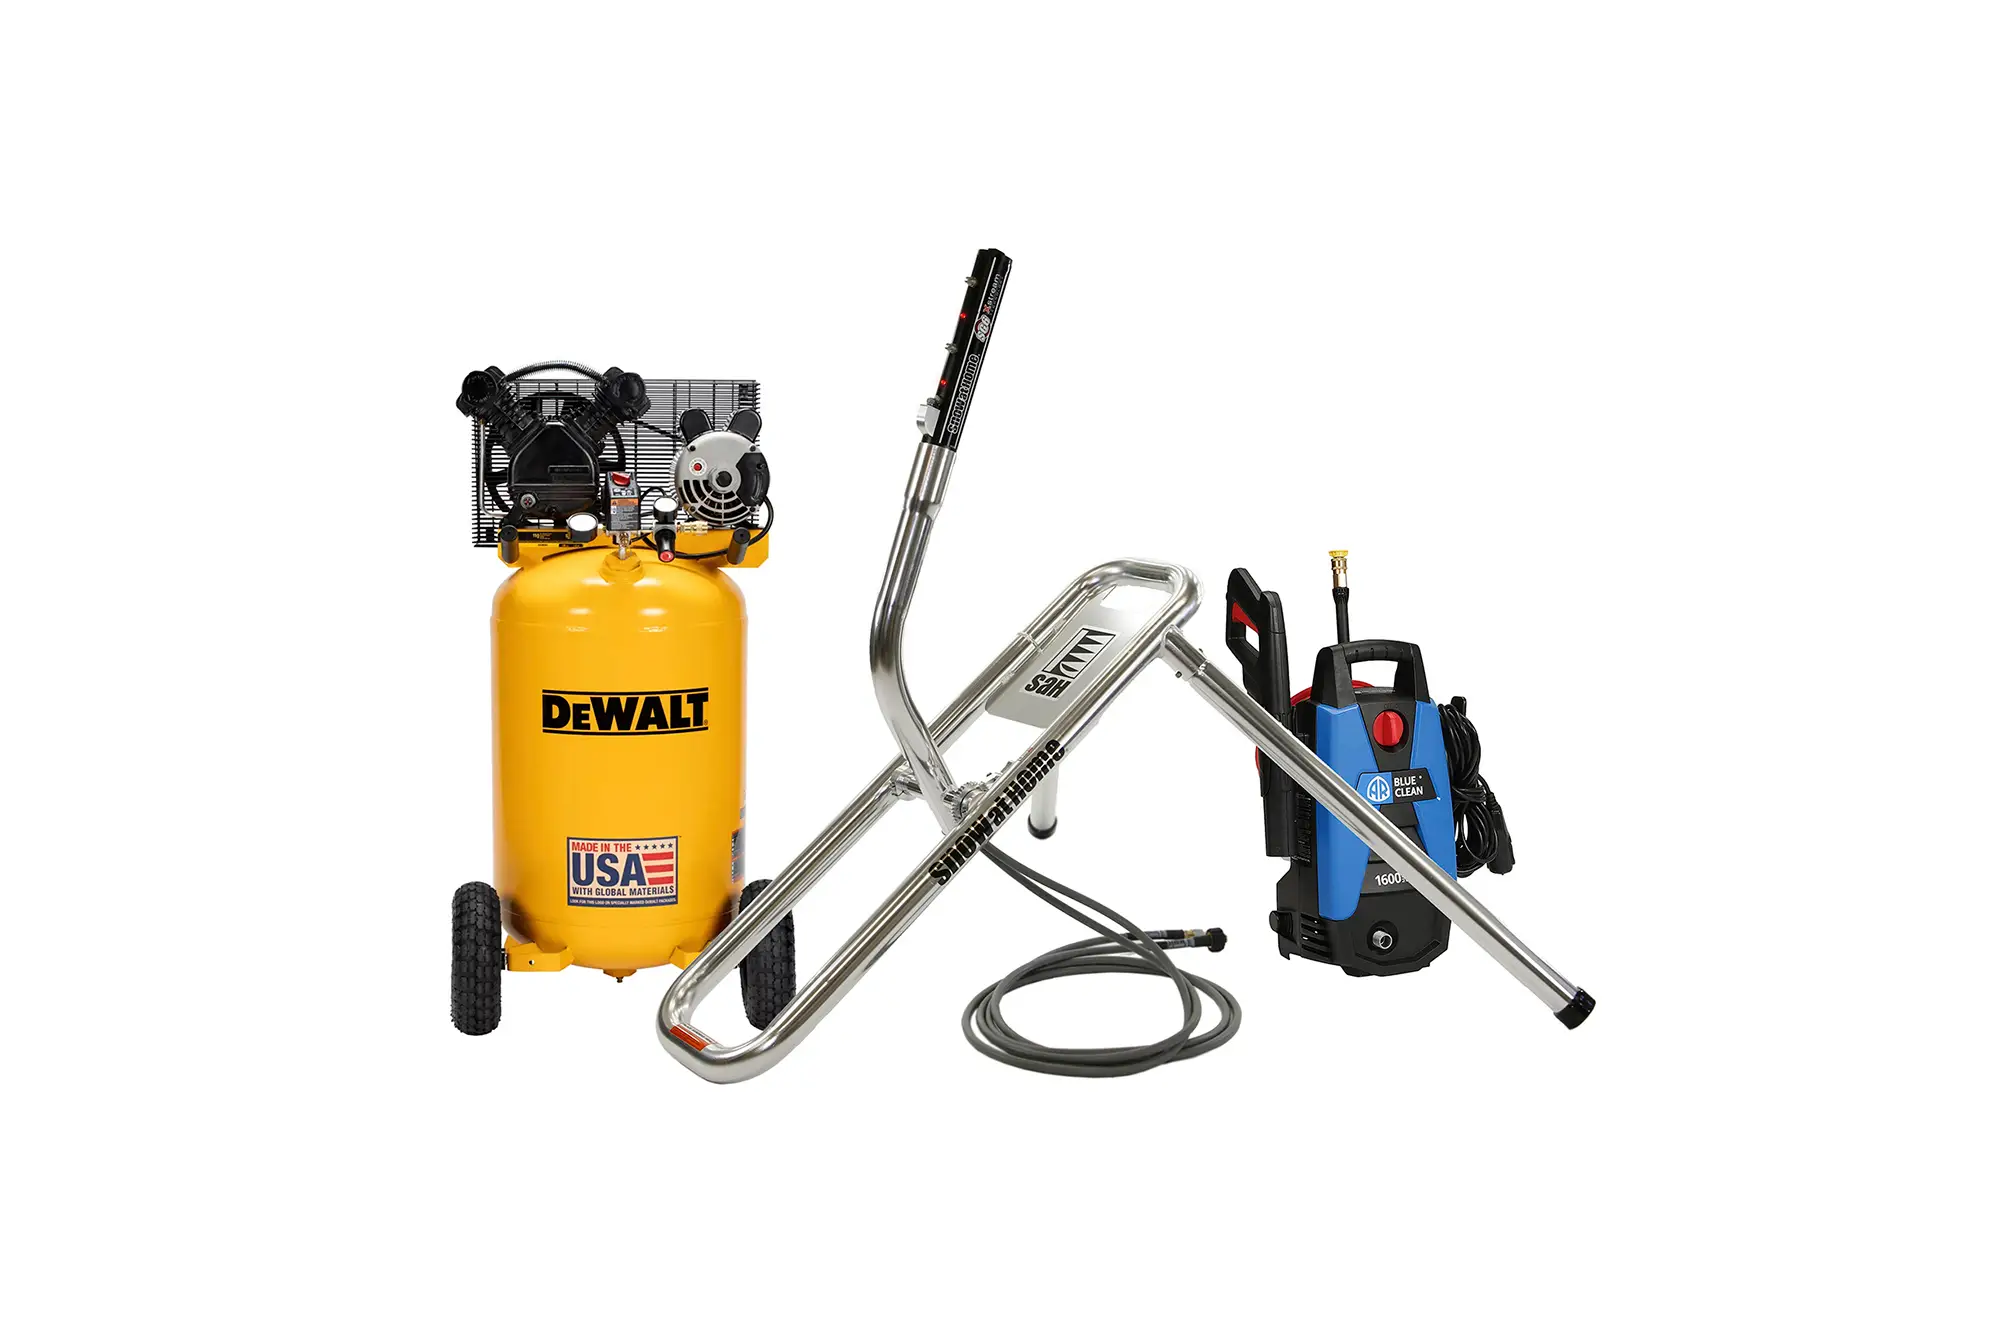 Home Snow Making Package - SG6 Snow Maker